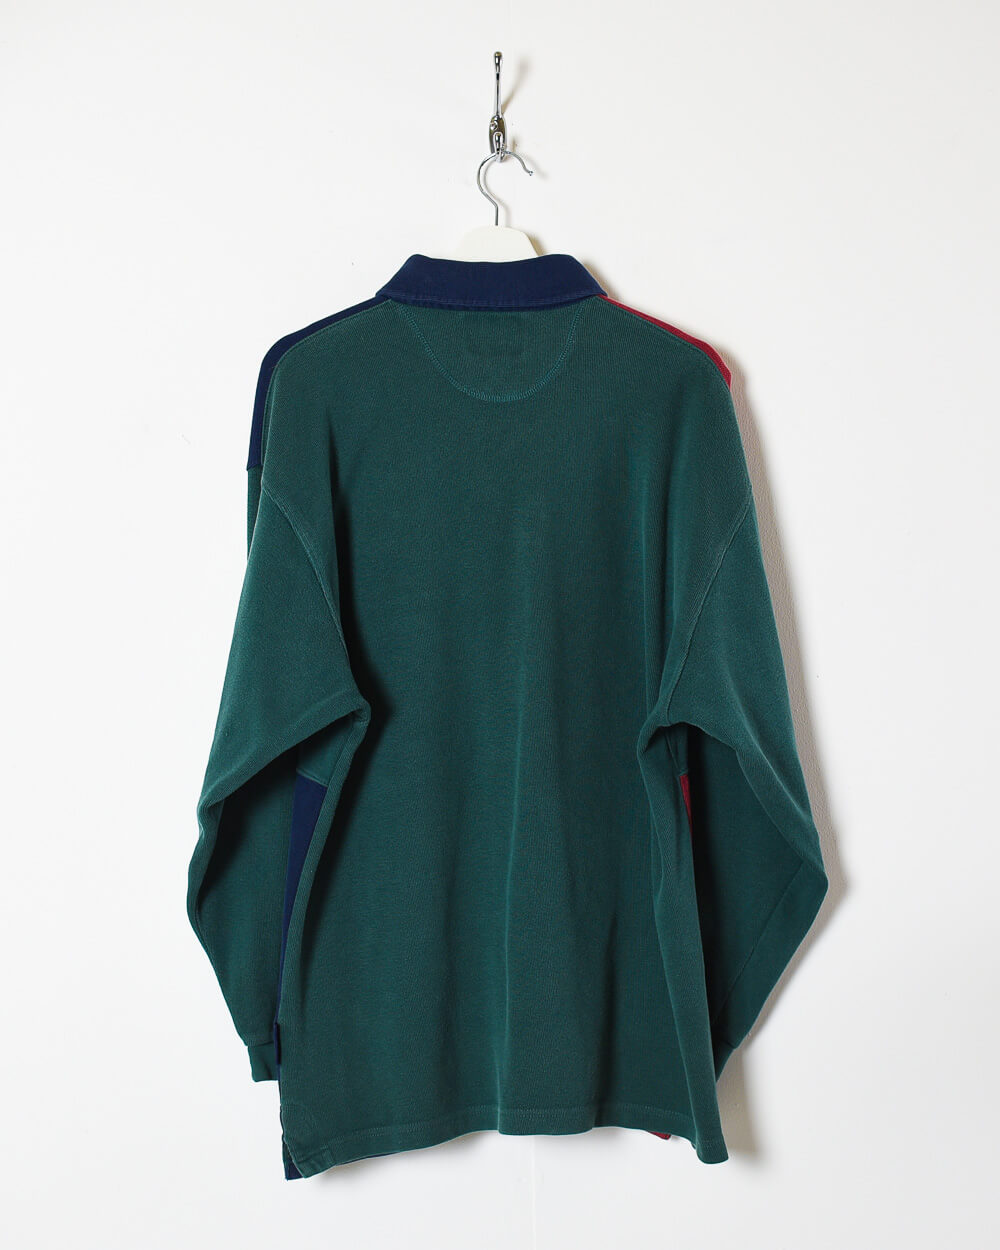 Green Colour Block Corduroy Rugby Shirt - X-Large